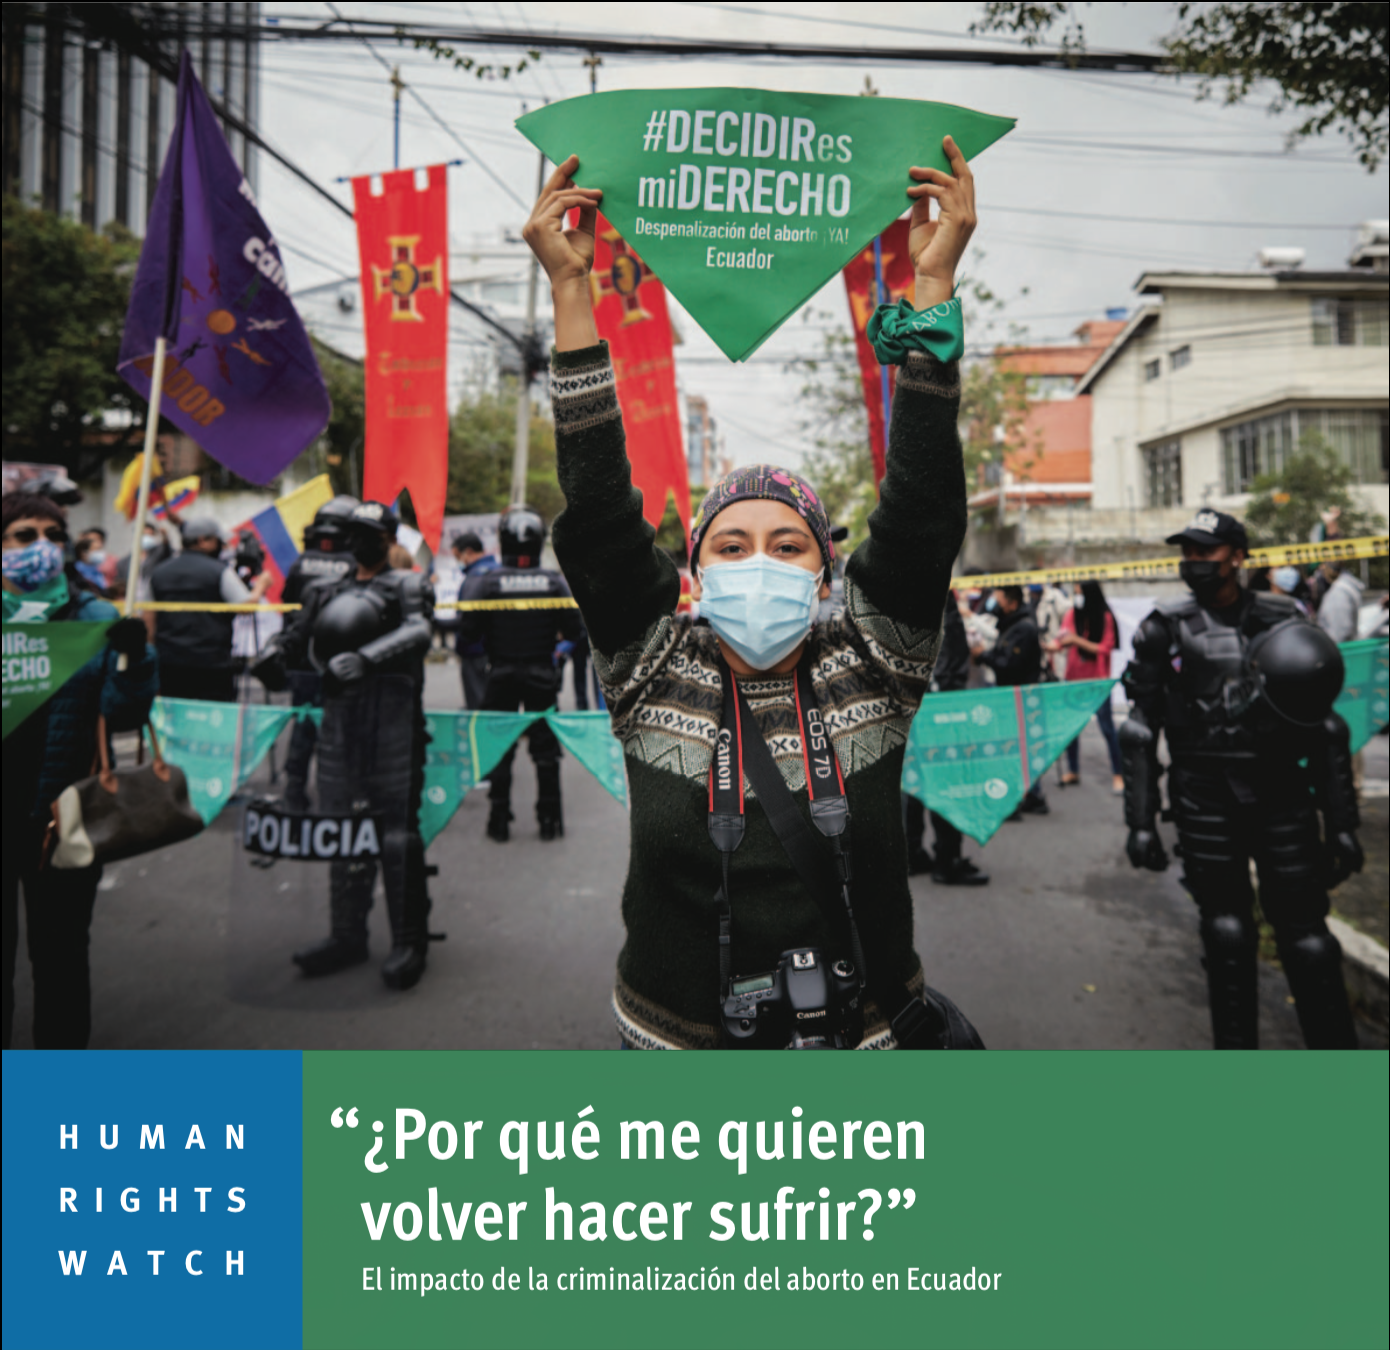 For Human Rights Watch: "Decidir es mi derecho" at the presentation of the Human Rights Watch report on the impact of the criminalization of abortion in Ecuador